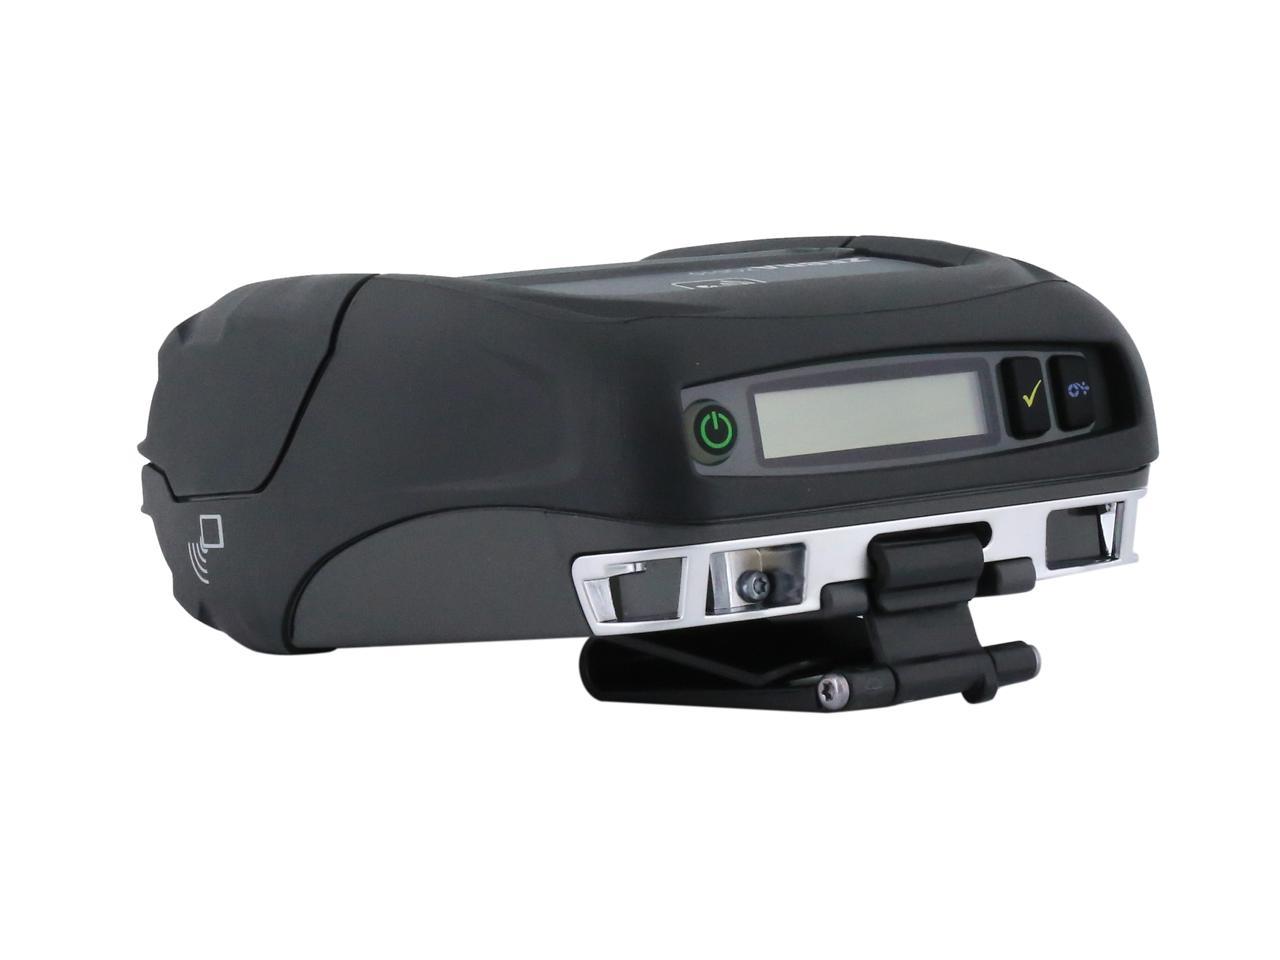 Zebra Zq510 3 Mobile Direct Thermal Receipt And Label Printer 203 Dpi Bluetooth 40 Linered 5330